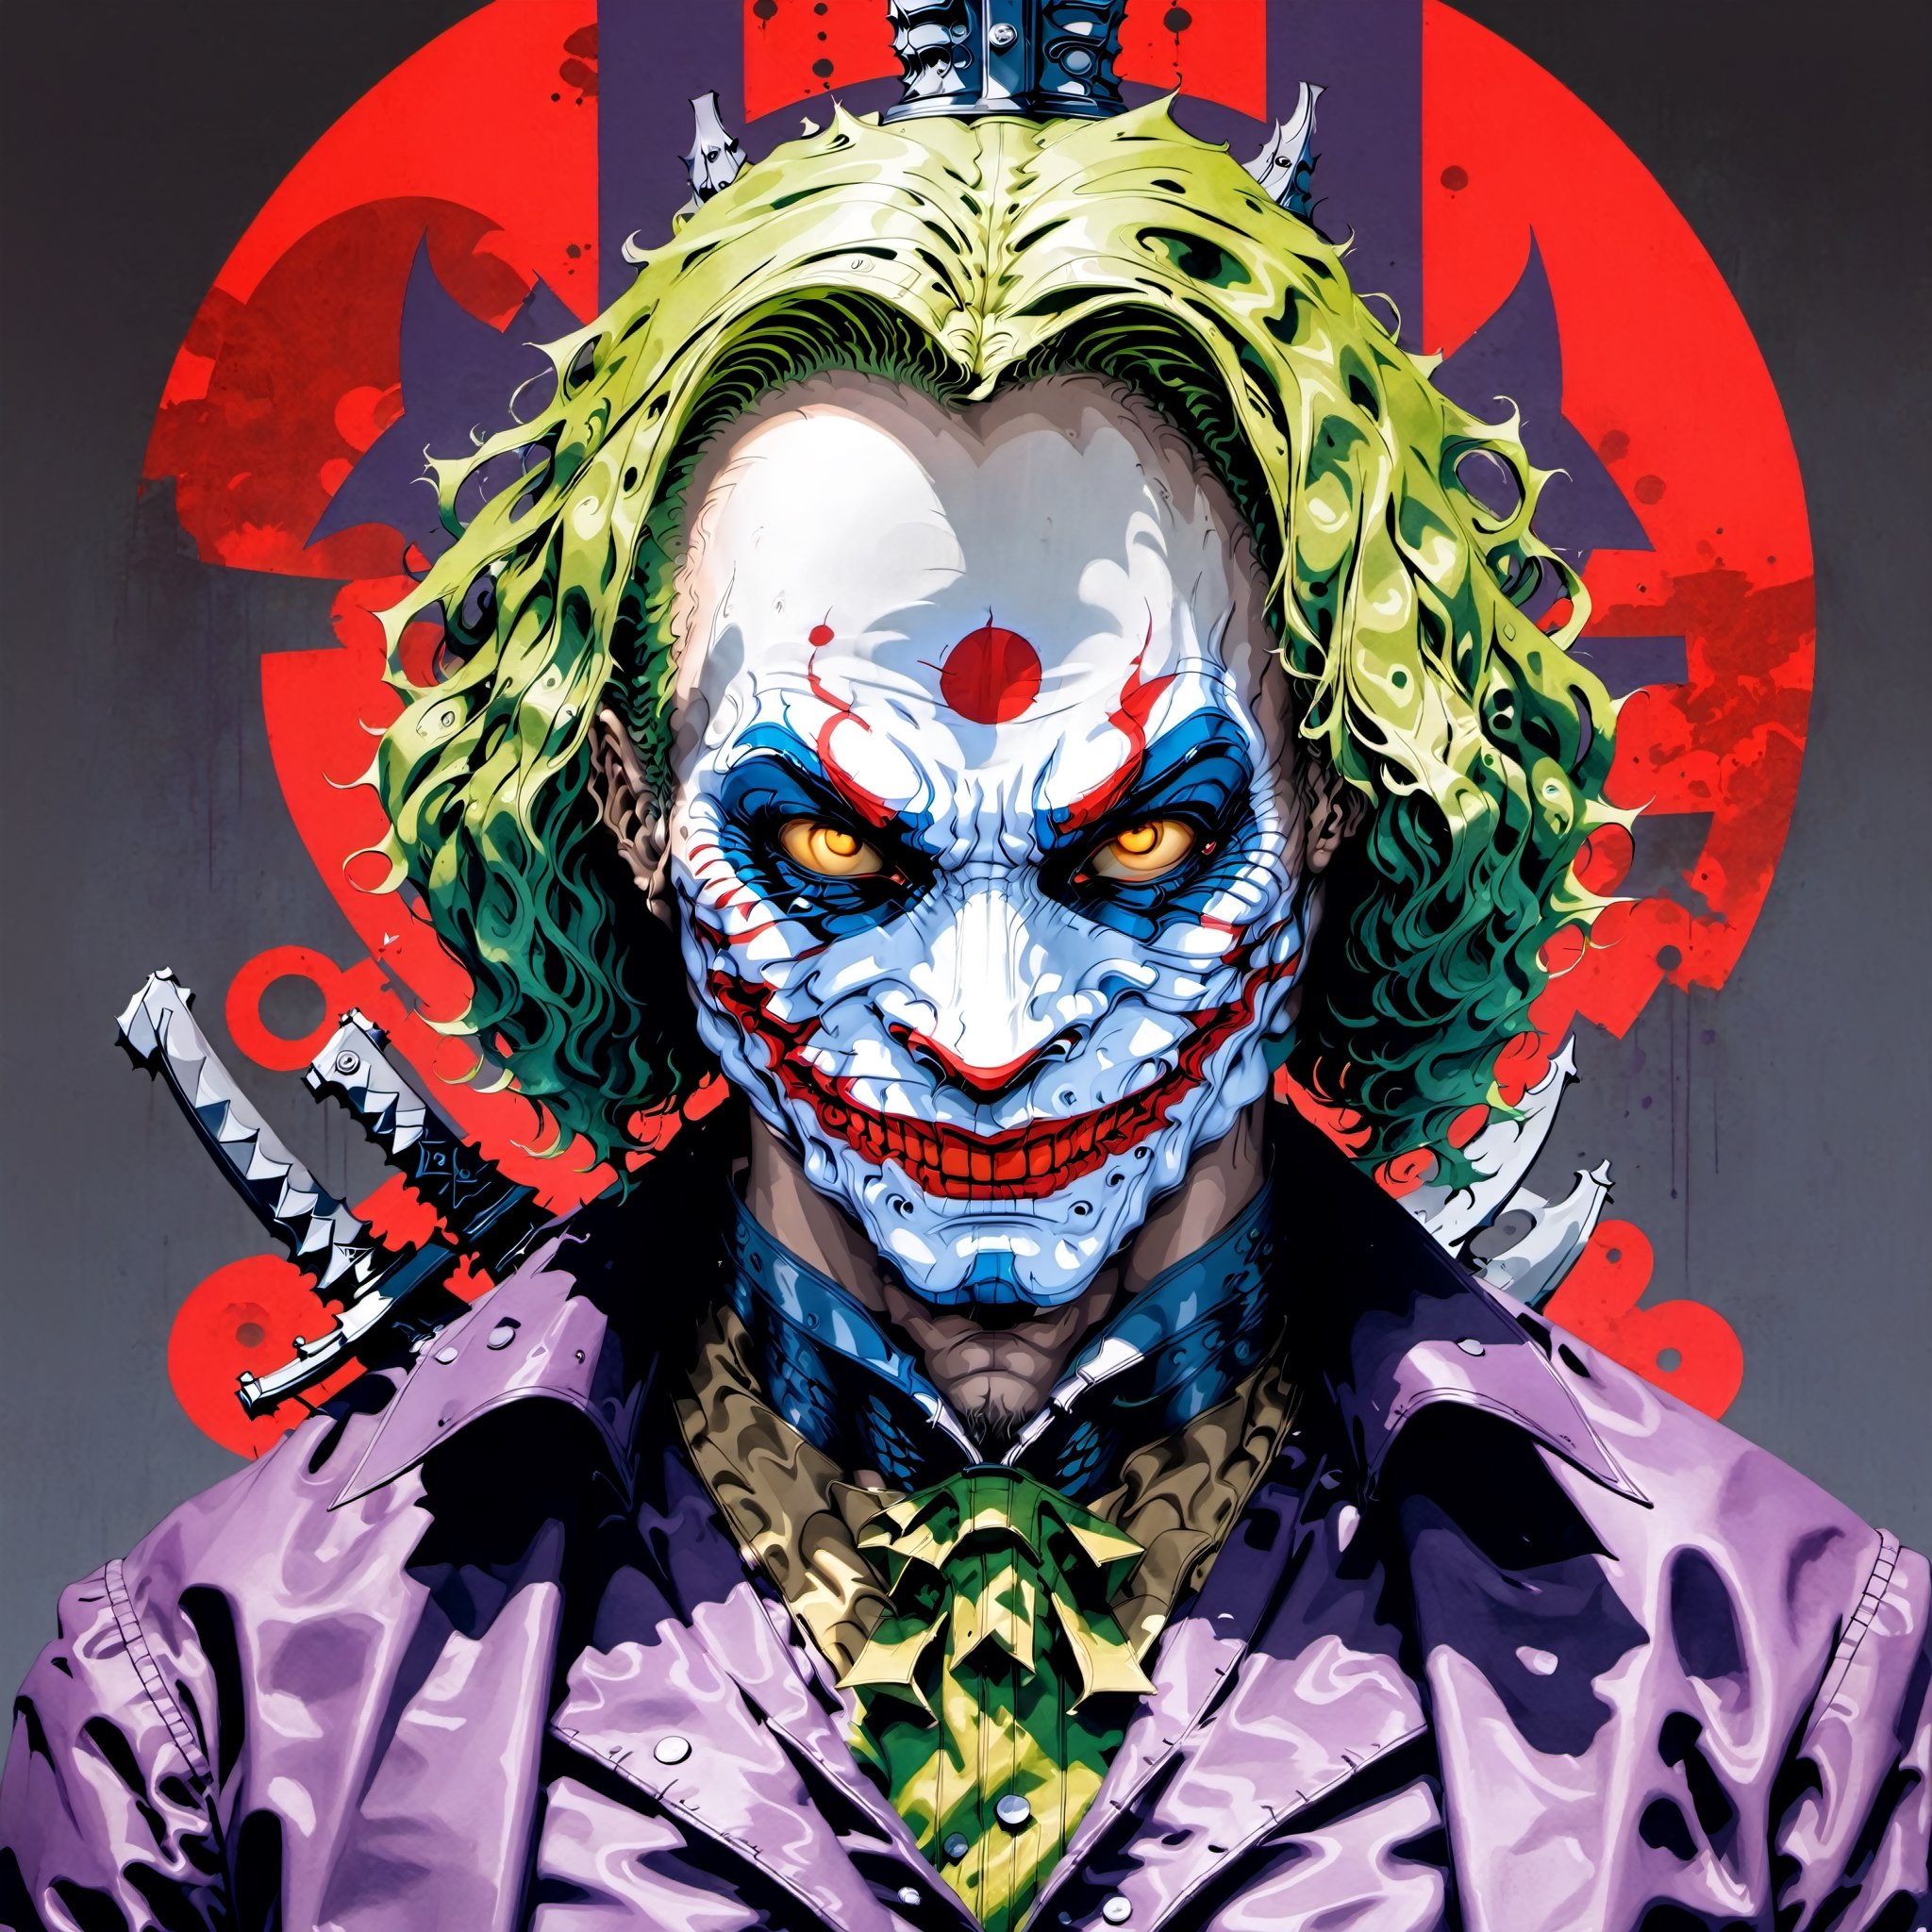 Heath Ledgers Joker character from the Dark Knight trillogy, movie poster, dynamic pose, dynomite, exposions, knives, magician, wonder, cyberpunk style anime characters and , sexy samurai lady, skull mask